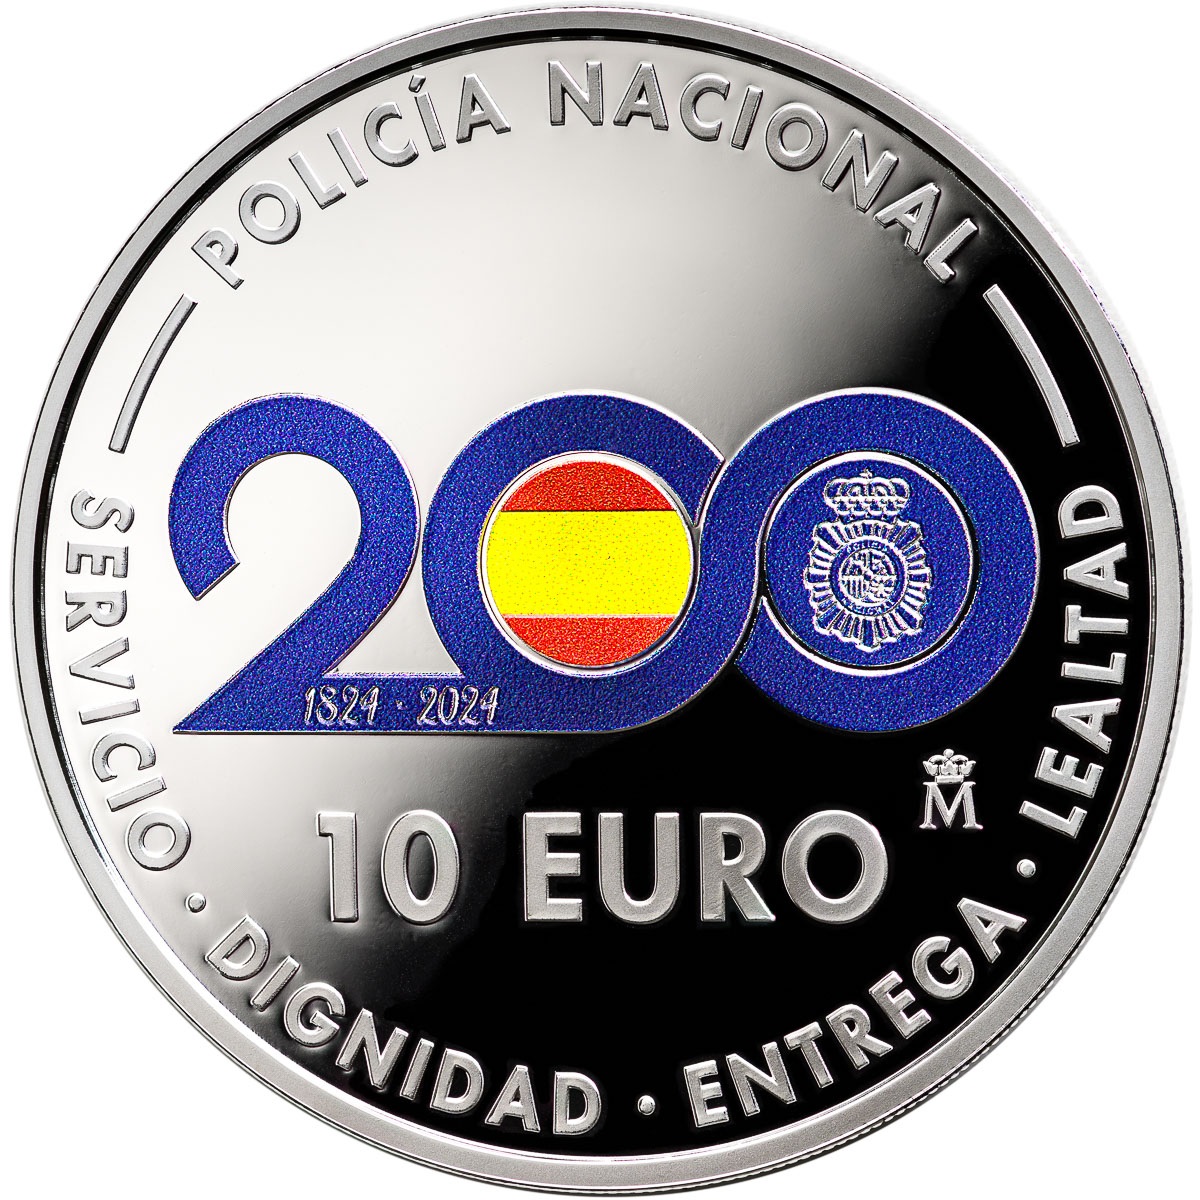 (EUR05.Proof.2024.92947001) 10 euro Spain 2024 Proof silver - Spanish national police Reverse (zoom)